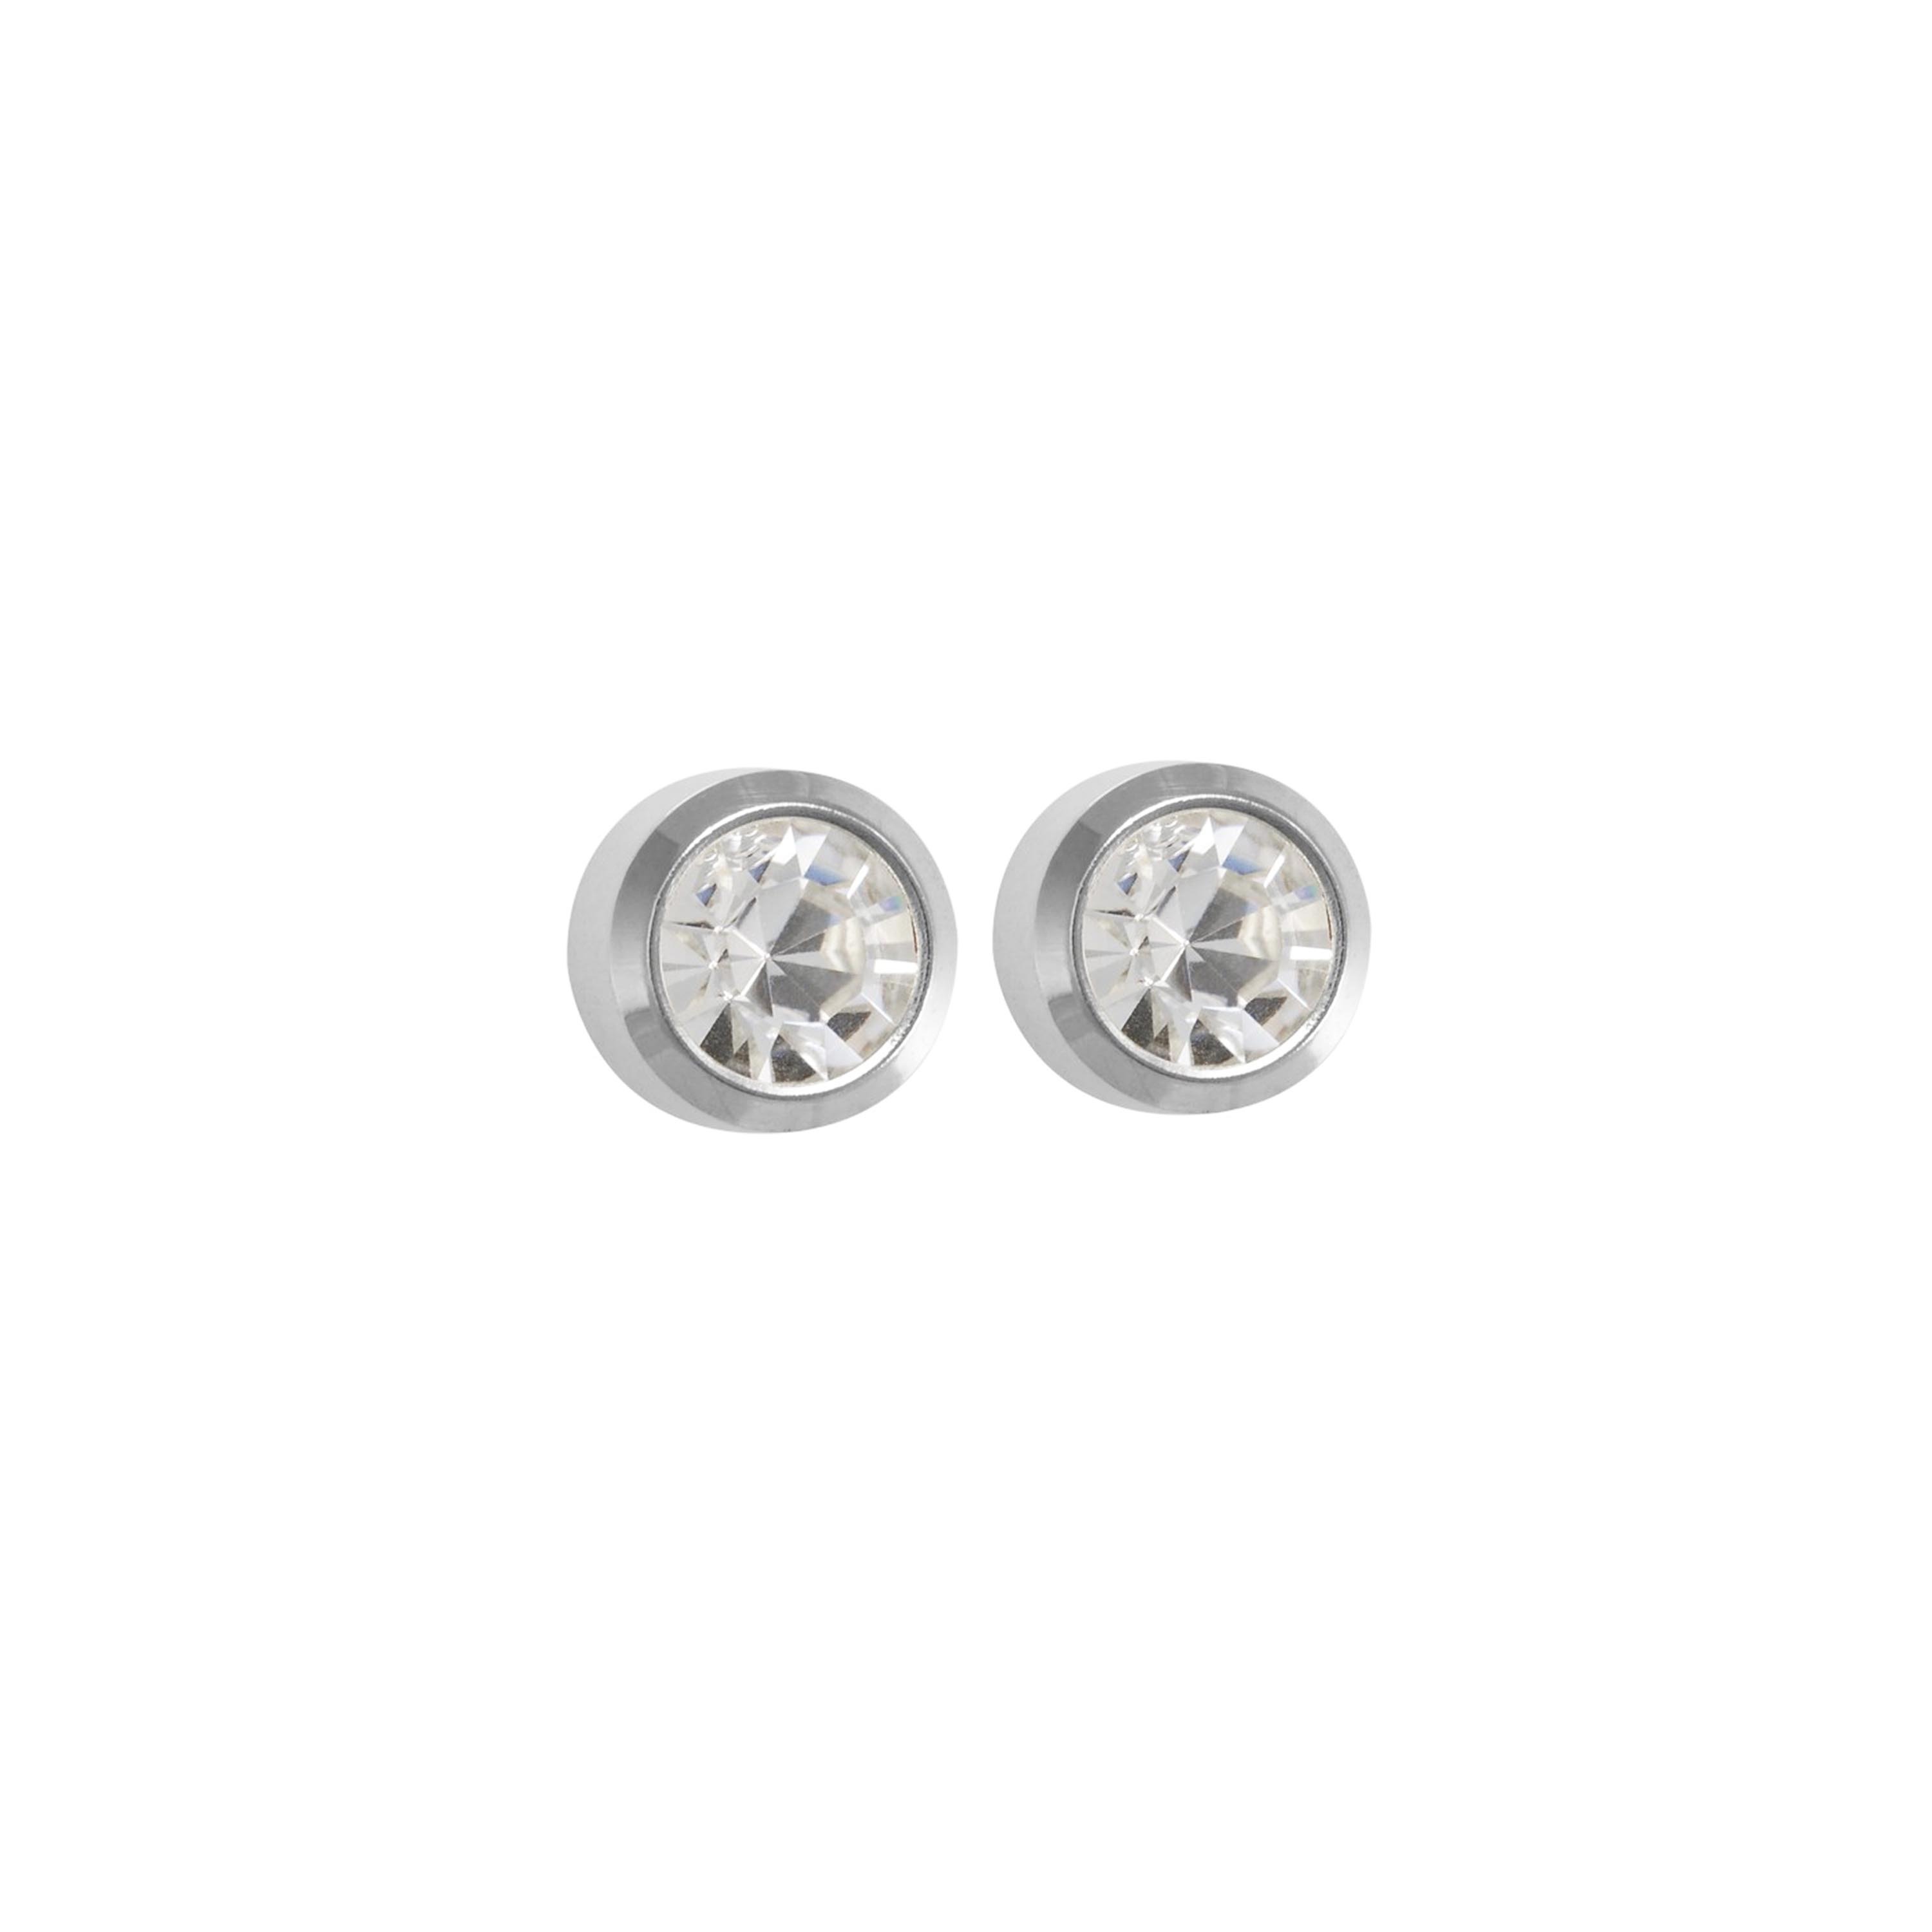 3MM - Bezel - April Crystal | Stainless Steel Piercing Ear Studs come Fashion Earrings | Studex Select